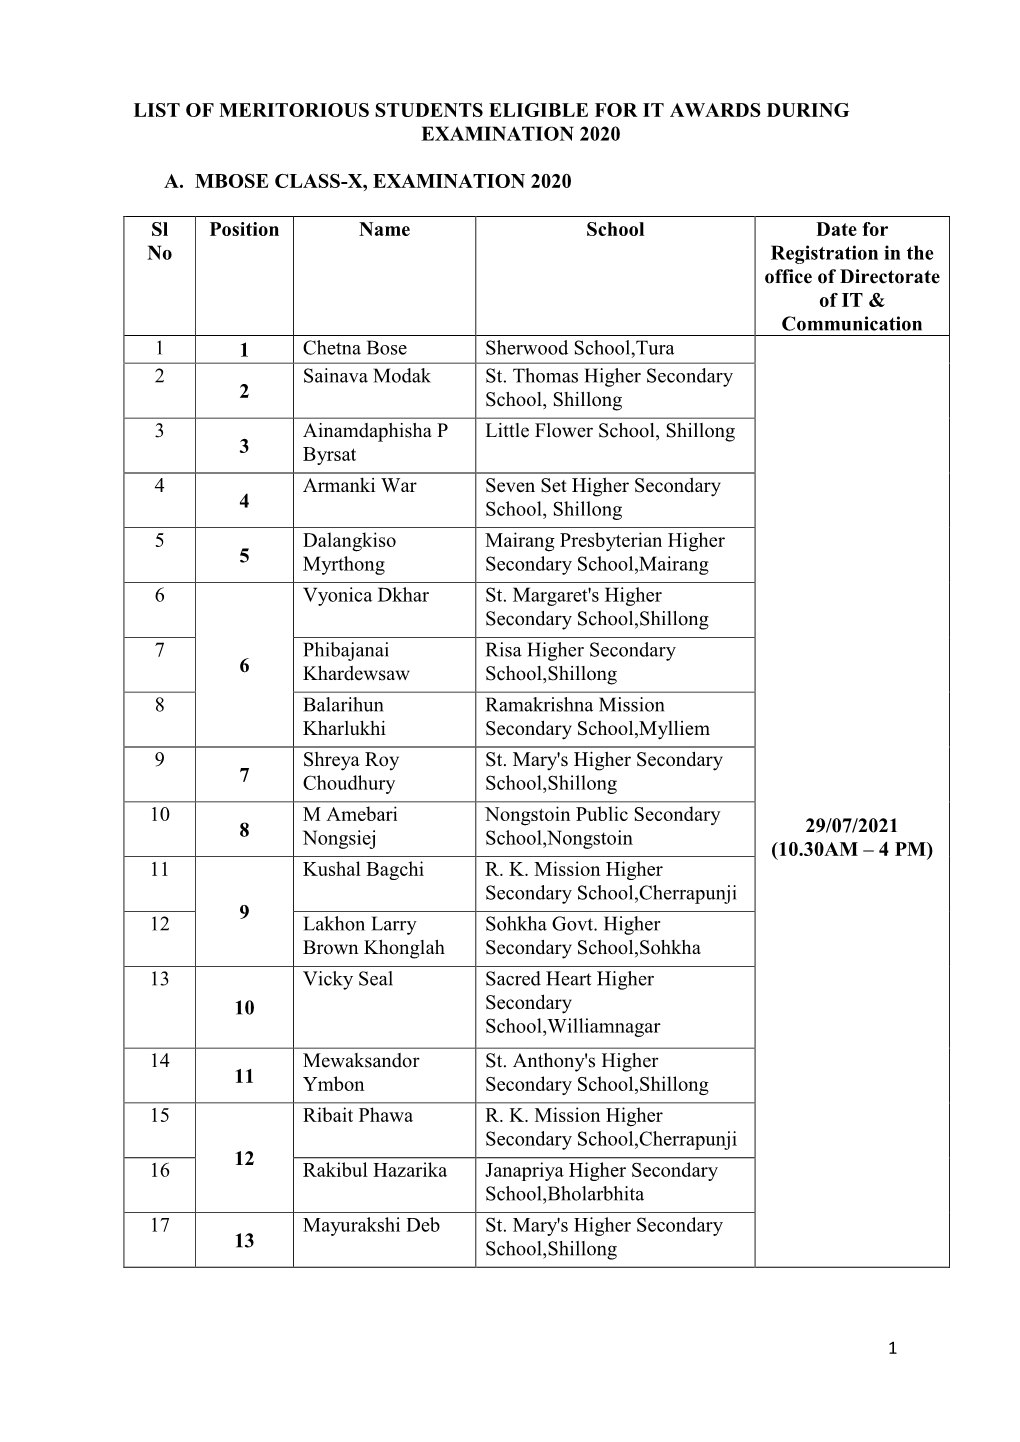 List of Meritorious Students Eligible for It Awards During Examination 2020